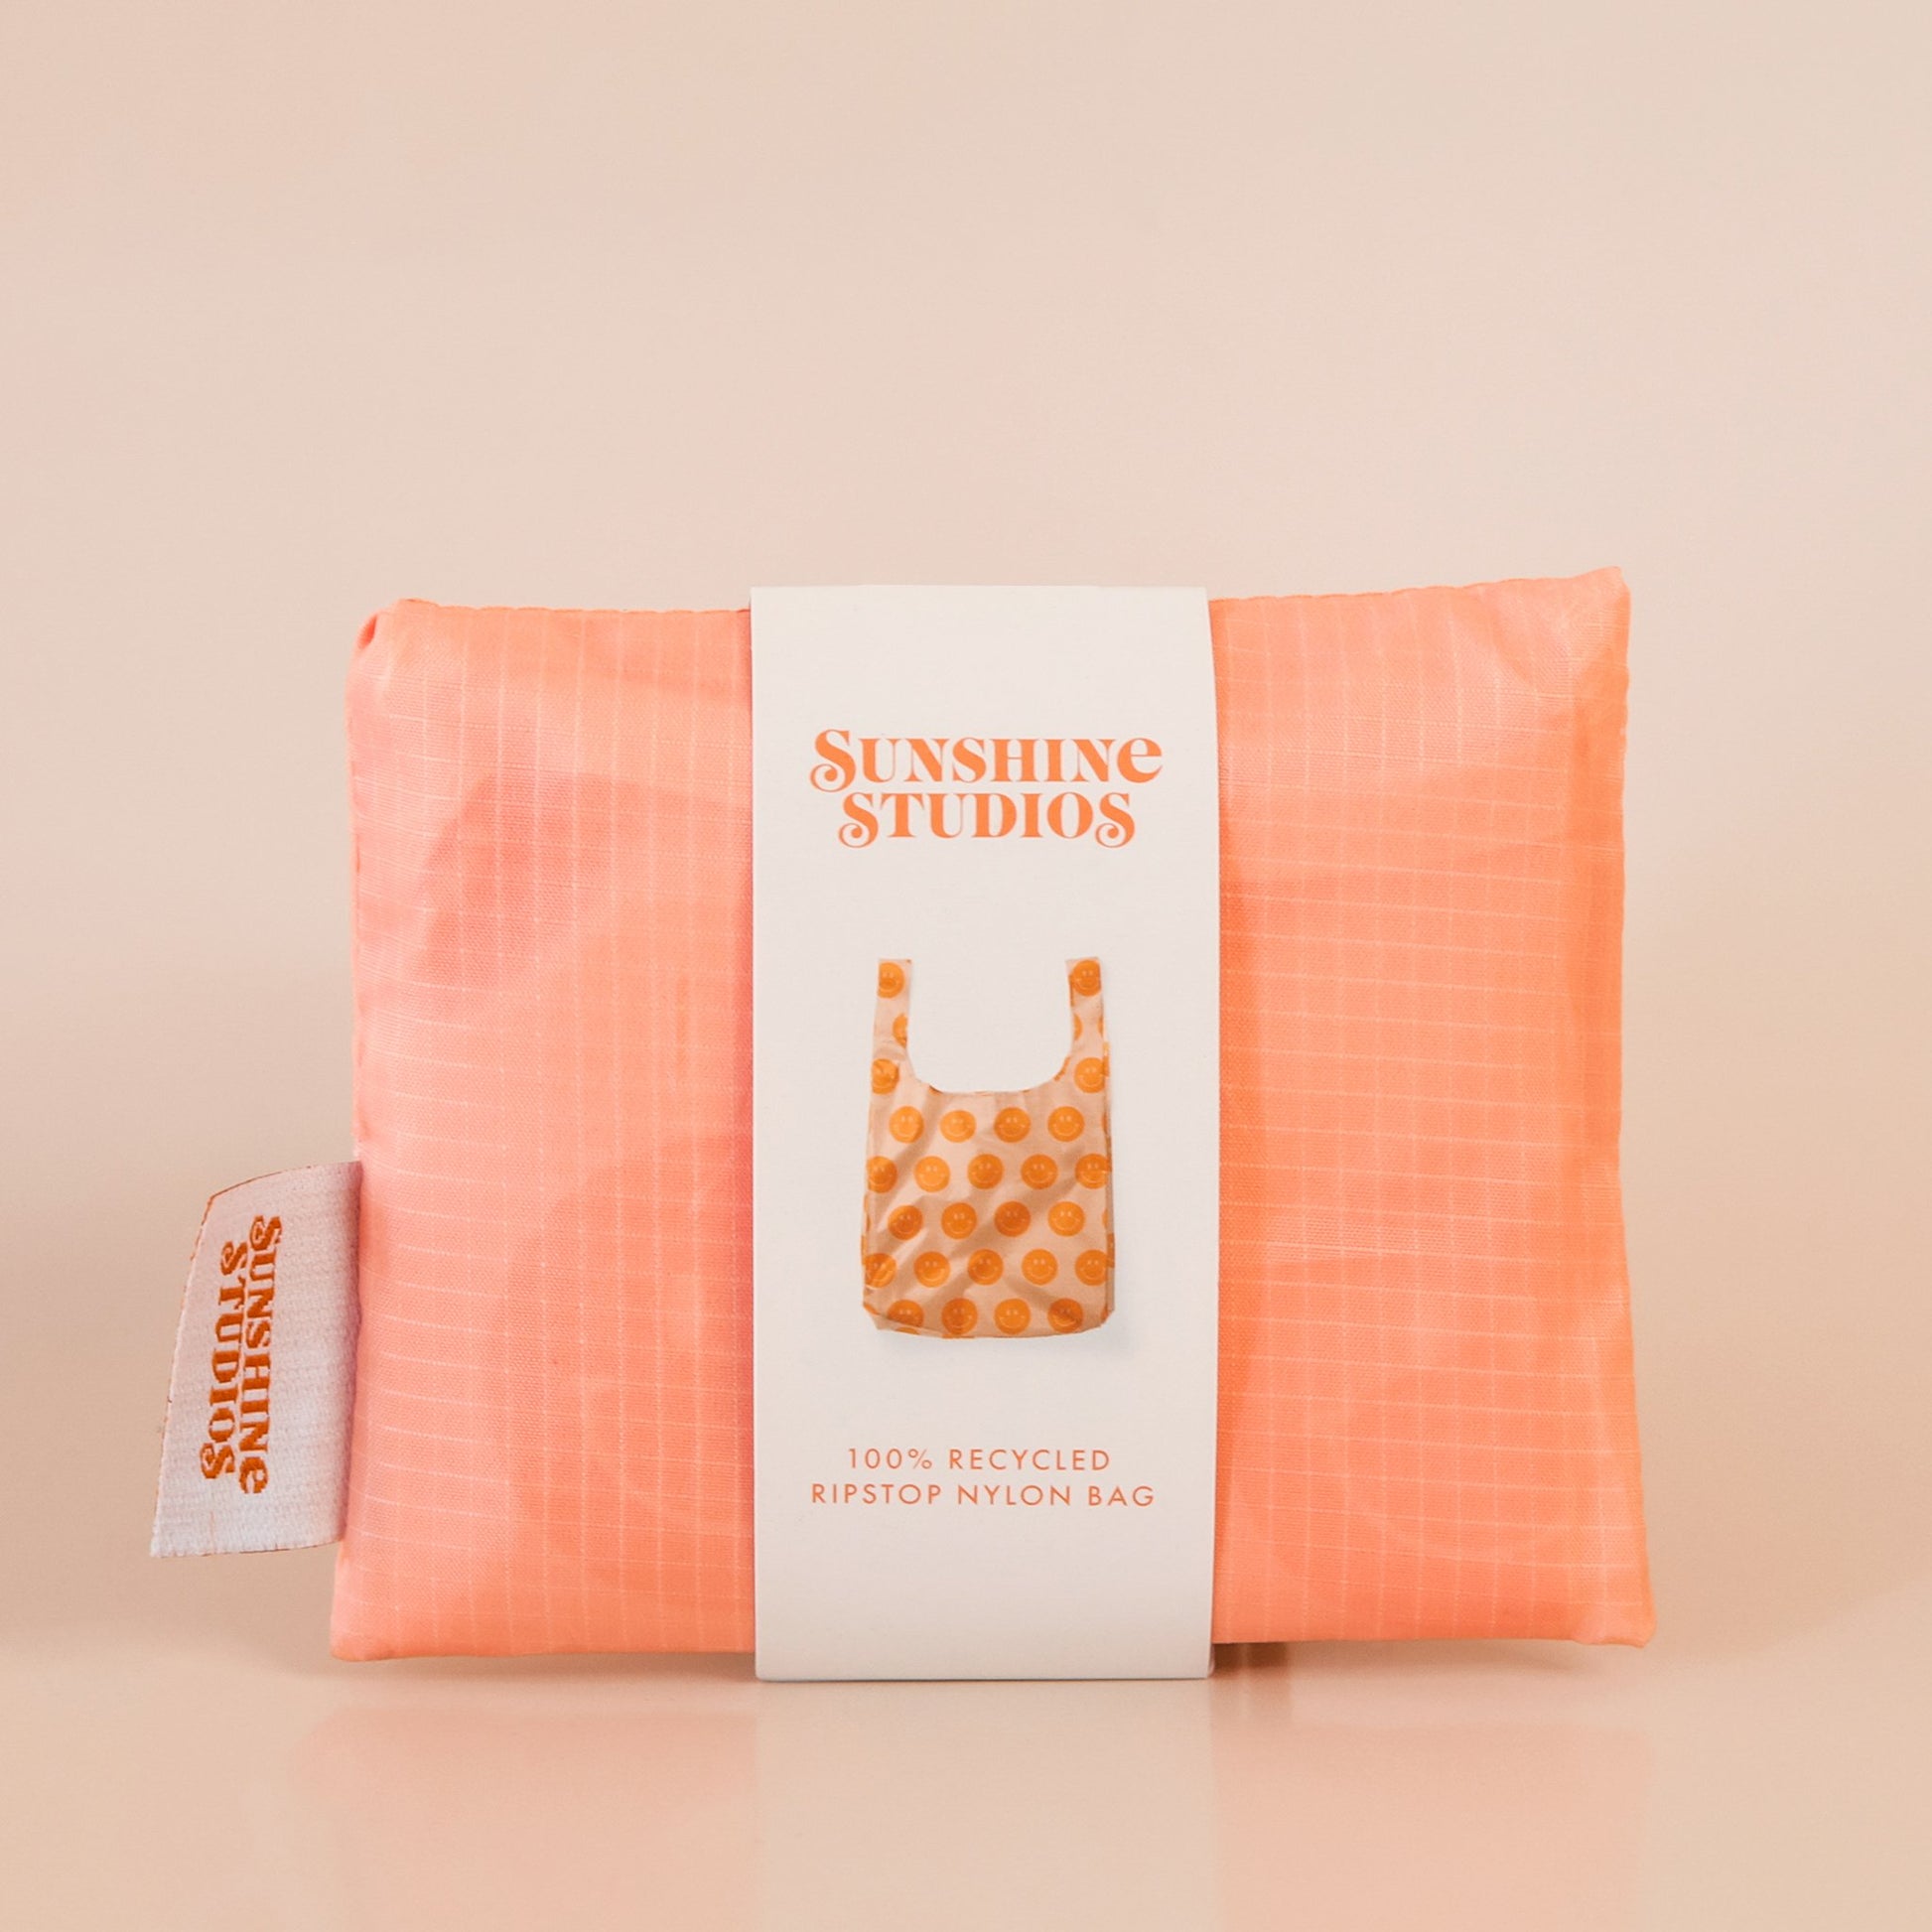 Folded up peach reusable bag folded into a small square and wrapped with white packaging. The packaging reads 'sunshine studios'. The label has a photo of the bag unfolded and reads '100% recycled ripstop nylon bag'